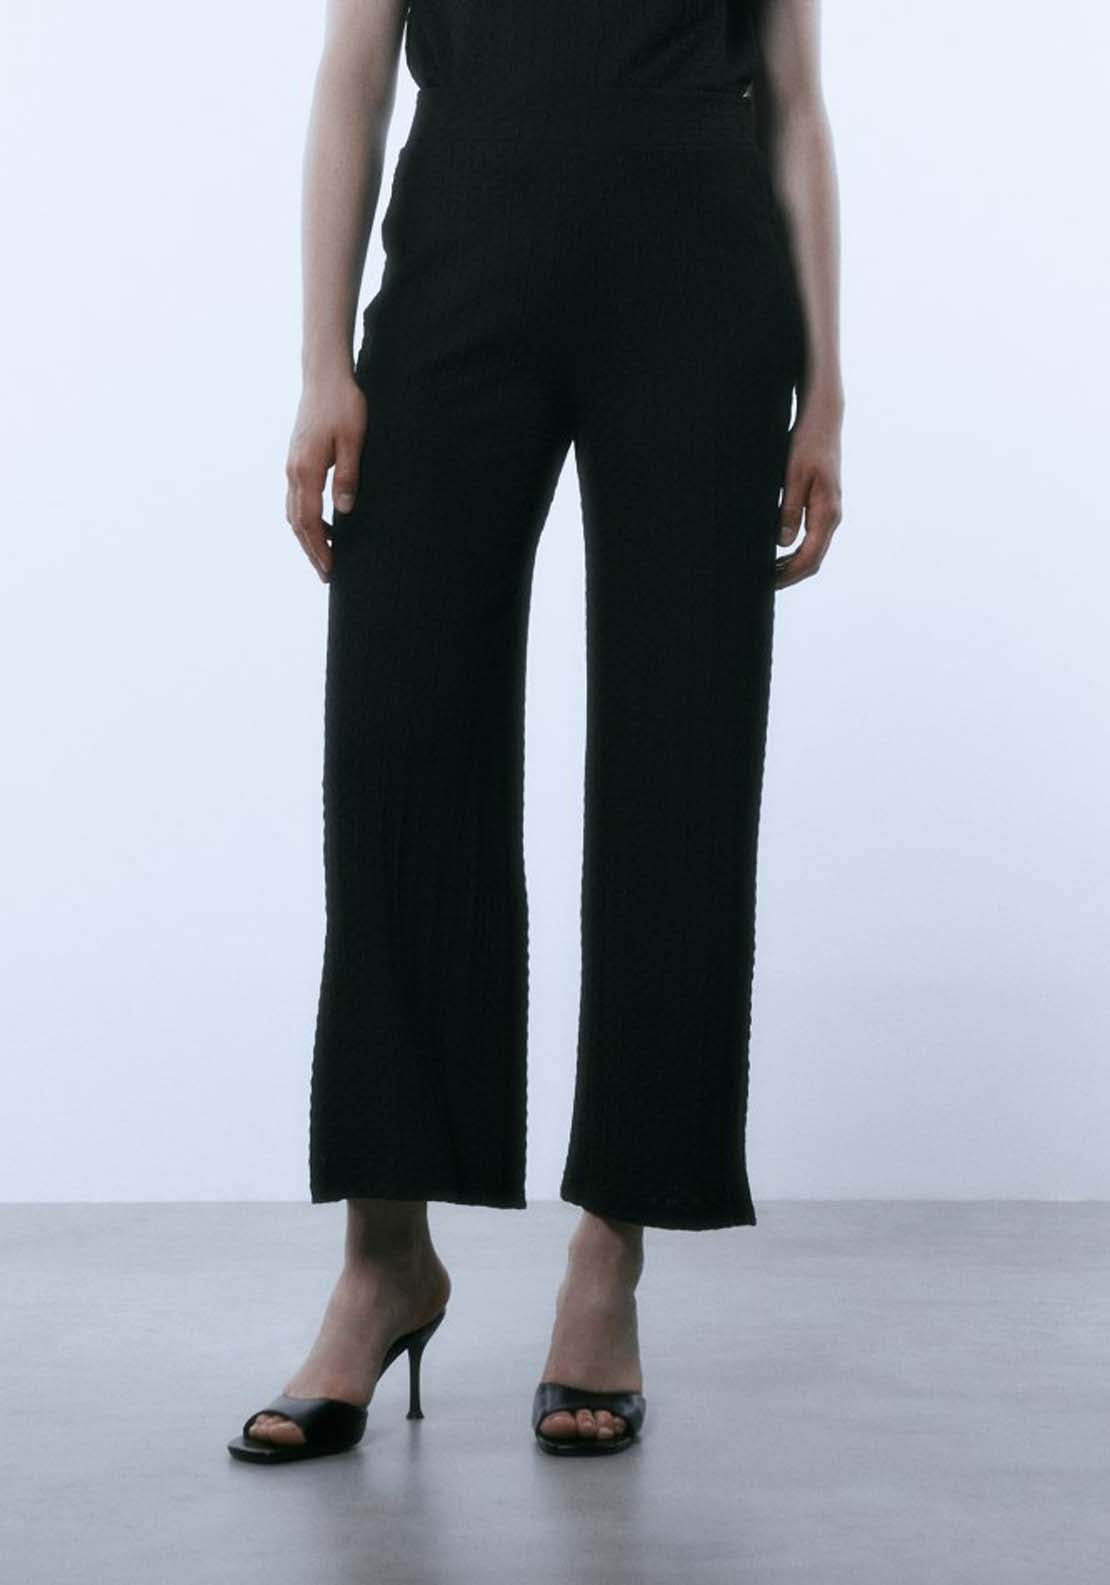 Sfera Zig-zag structured trousers - Black 1 Shaws Department Stores